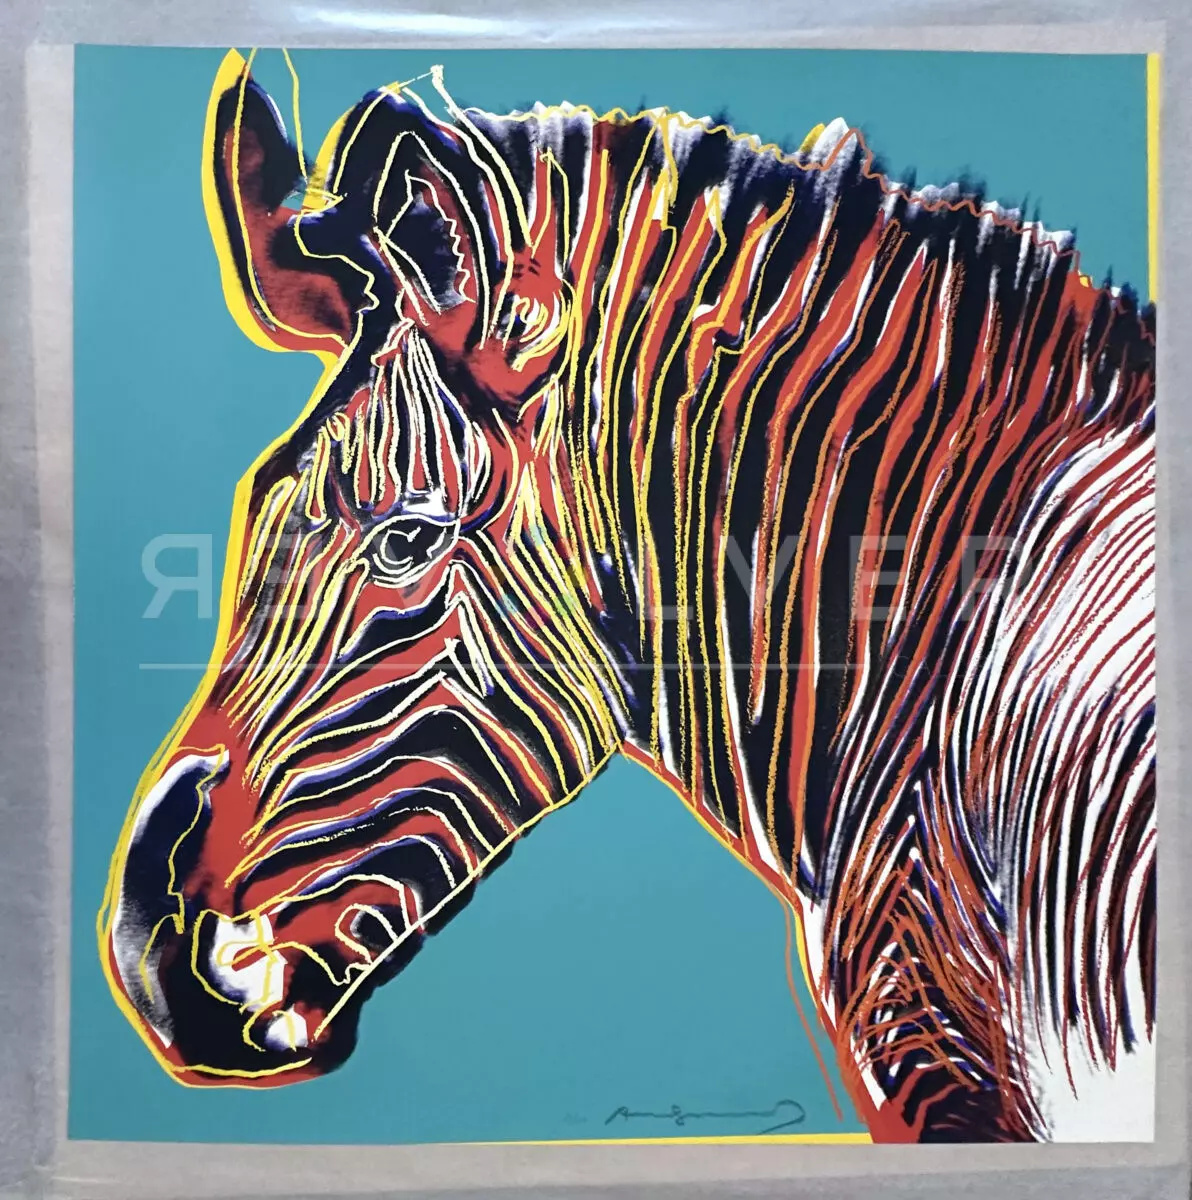 Grevy's Zebra 300 - Andy Warhol - For Sale at Revolver Gallery